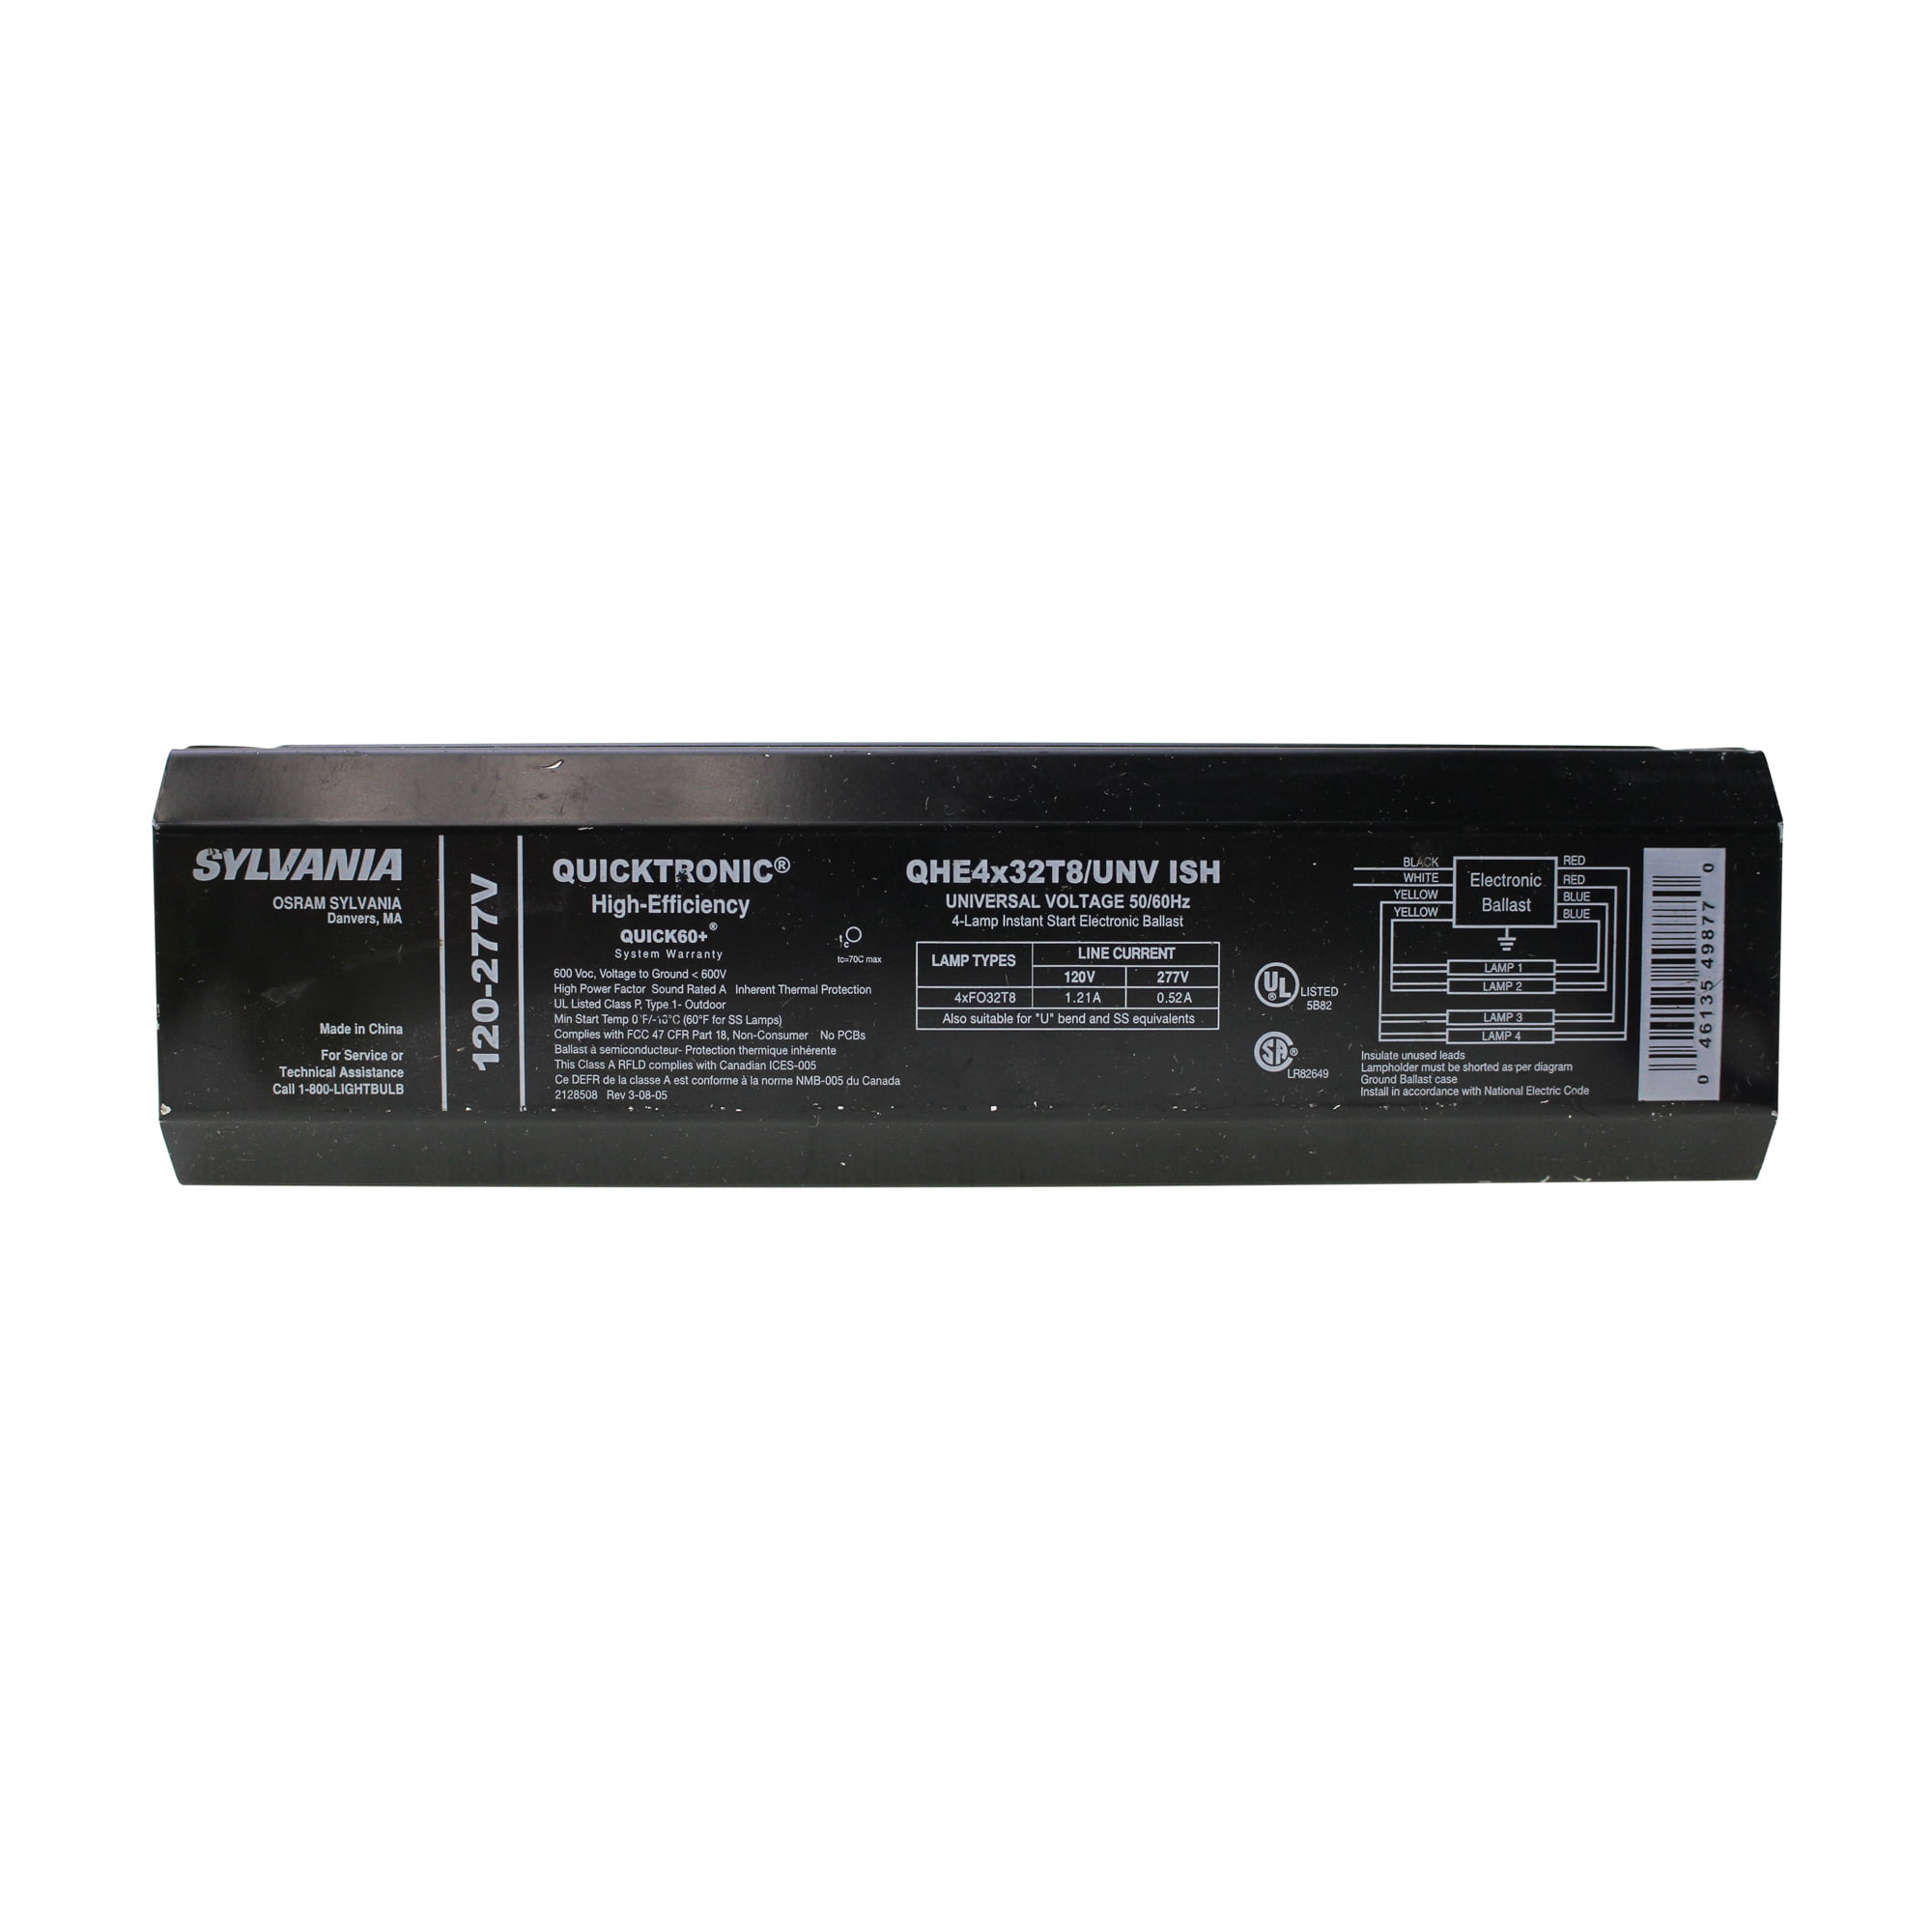 Motorola M1-cf-18-b-s-120 Takeout 120v CFL Ballast 18w 4p Lamp See PICS for sale online 